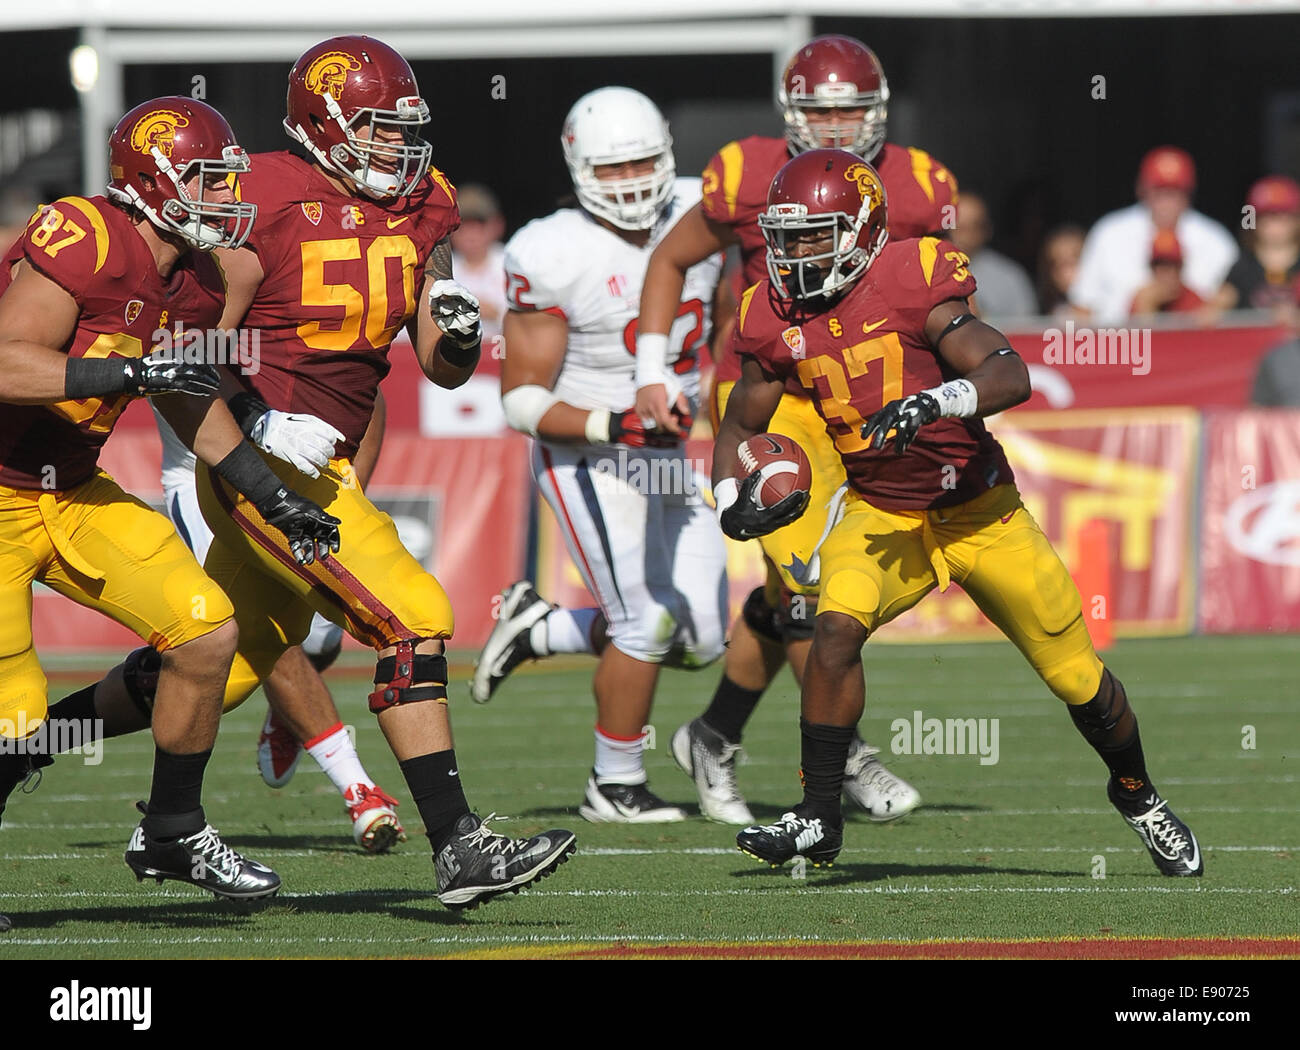 August 30, 2014, Los Angeles, CA...USC Trojans tailback (37) Javorius Allen, tightend (87) Chris Willson, offensive guard (50) Toa Lobendahn and offensive guard (72) Chad Wheeler in action beating the Fresno State bulldogs 52-13 on Saturday night. The Trojans ran a school- and Pac-12-record 105 plays while racking up 37 first downs and 701 yards of total offense to Fresno States 17 first downs and 317 yards, at the Los Angeles Memorial Coliseum, on August 30, 2014. (Mandatory Credit: Jose Marin / MarinMedia.org / Cal Sport Media) (ABSOLUTELY - ALL Complete photographer, and company credit(s) r Stock Photo